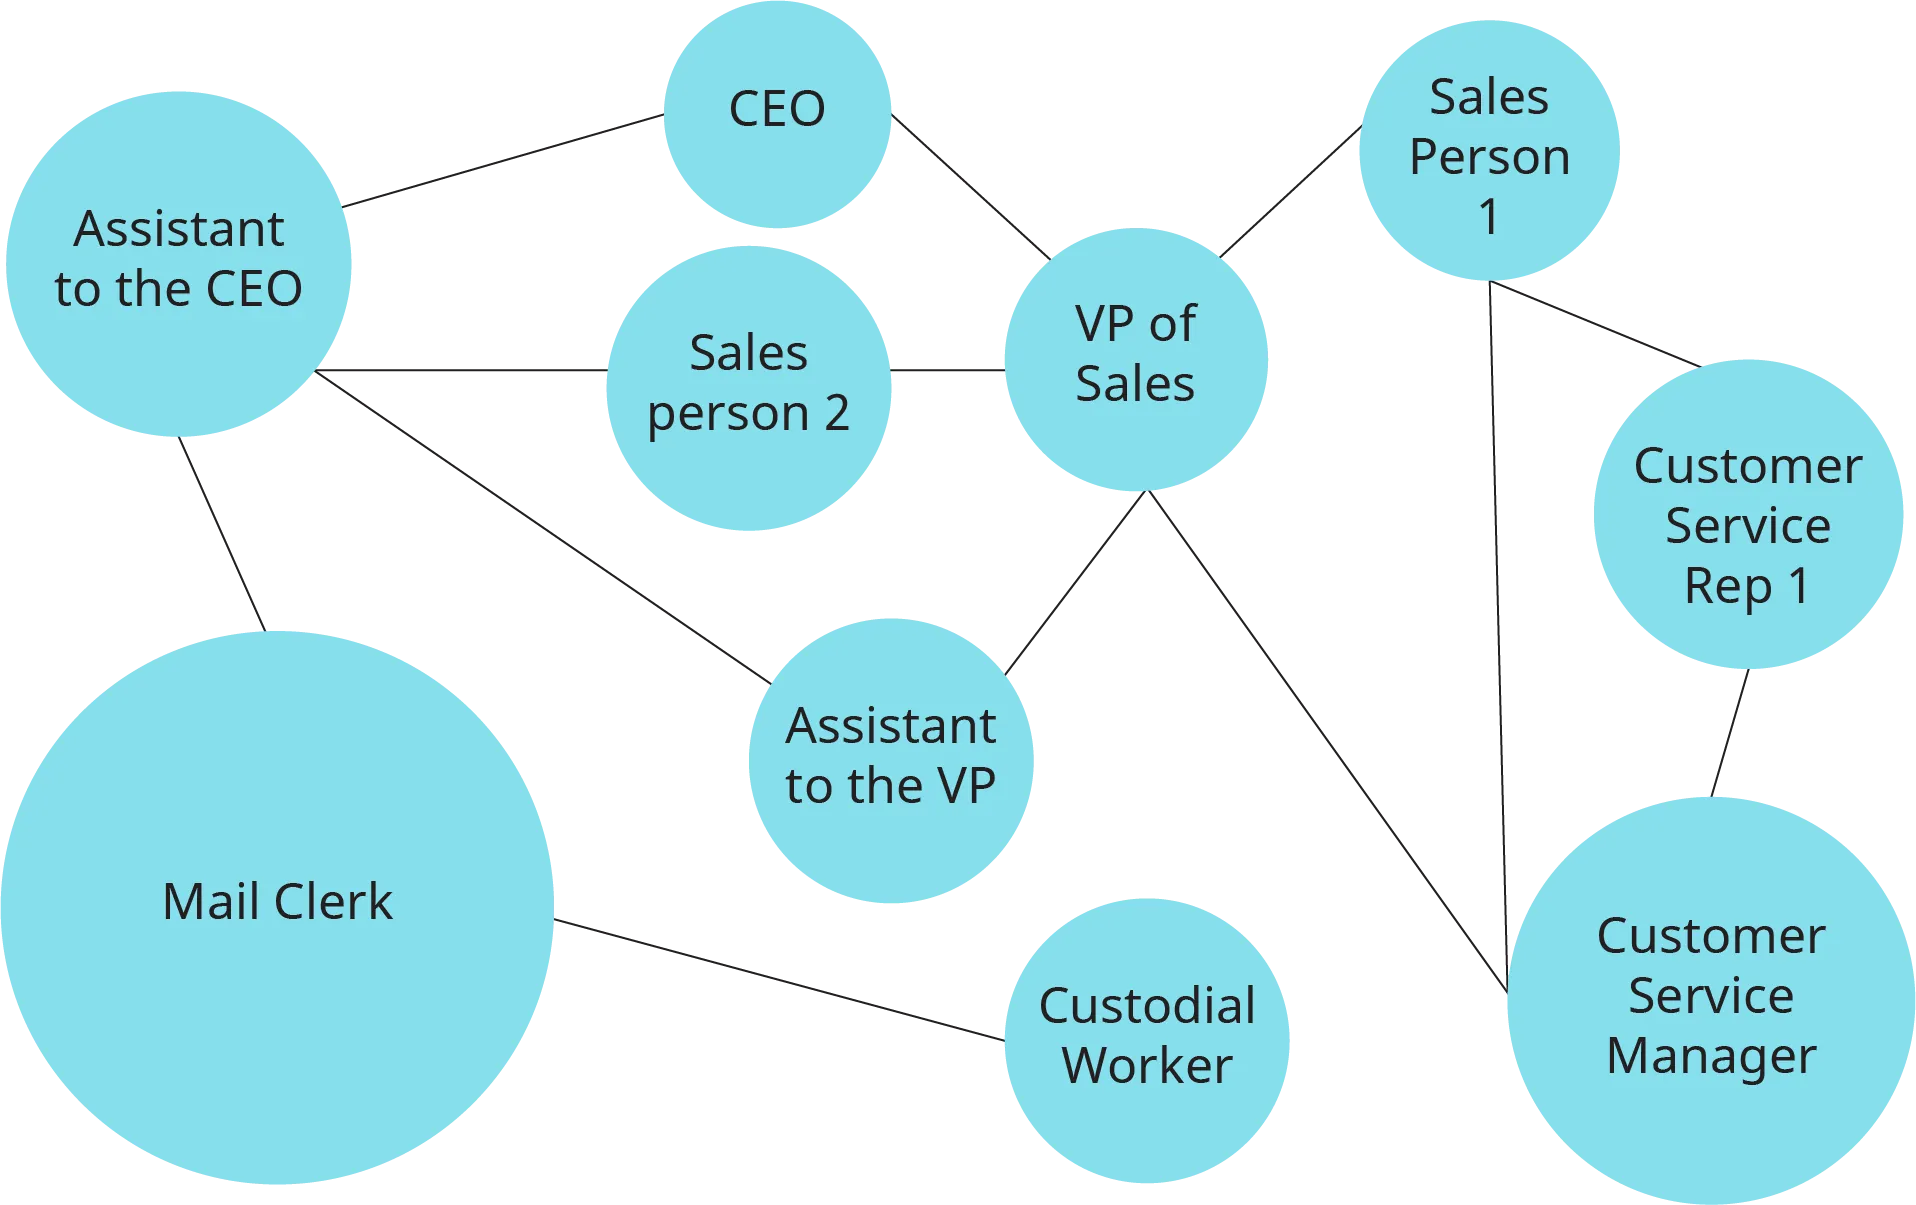 A flowchart shows a network map depicting the structure of an informal organization.